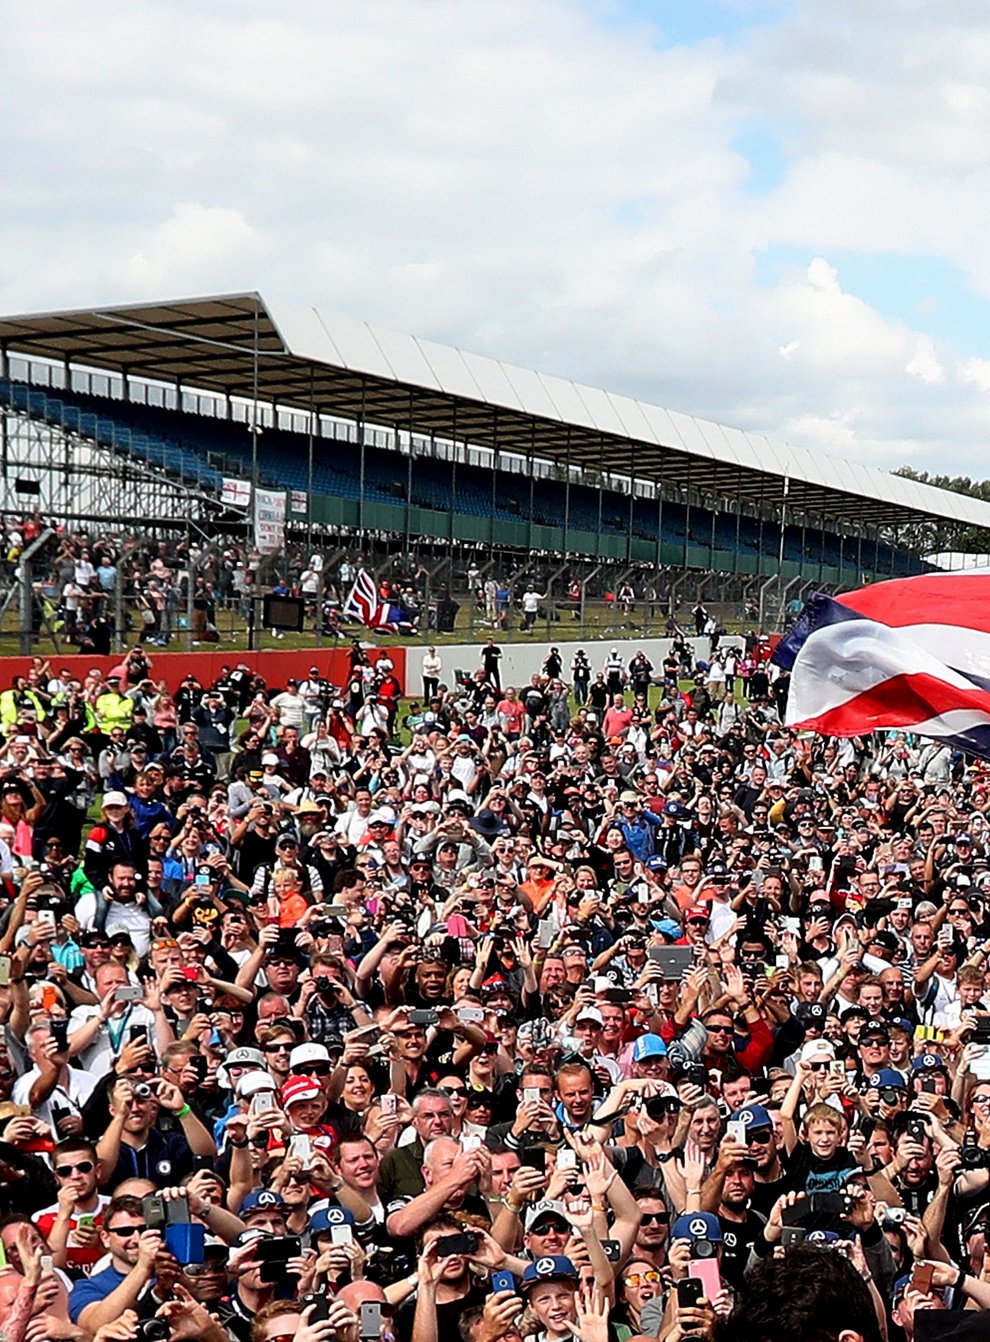 Lewis Hamilton will have to celebrate without his home fans should he win the race again this year (PA Images)